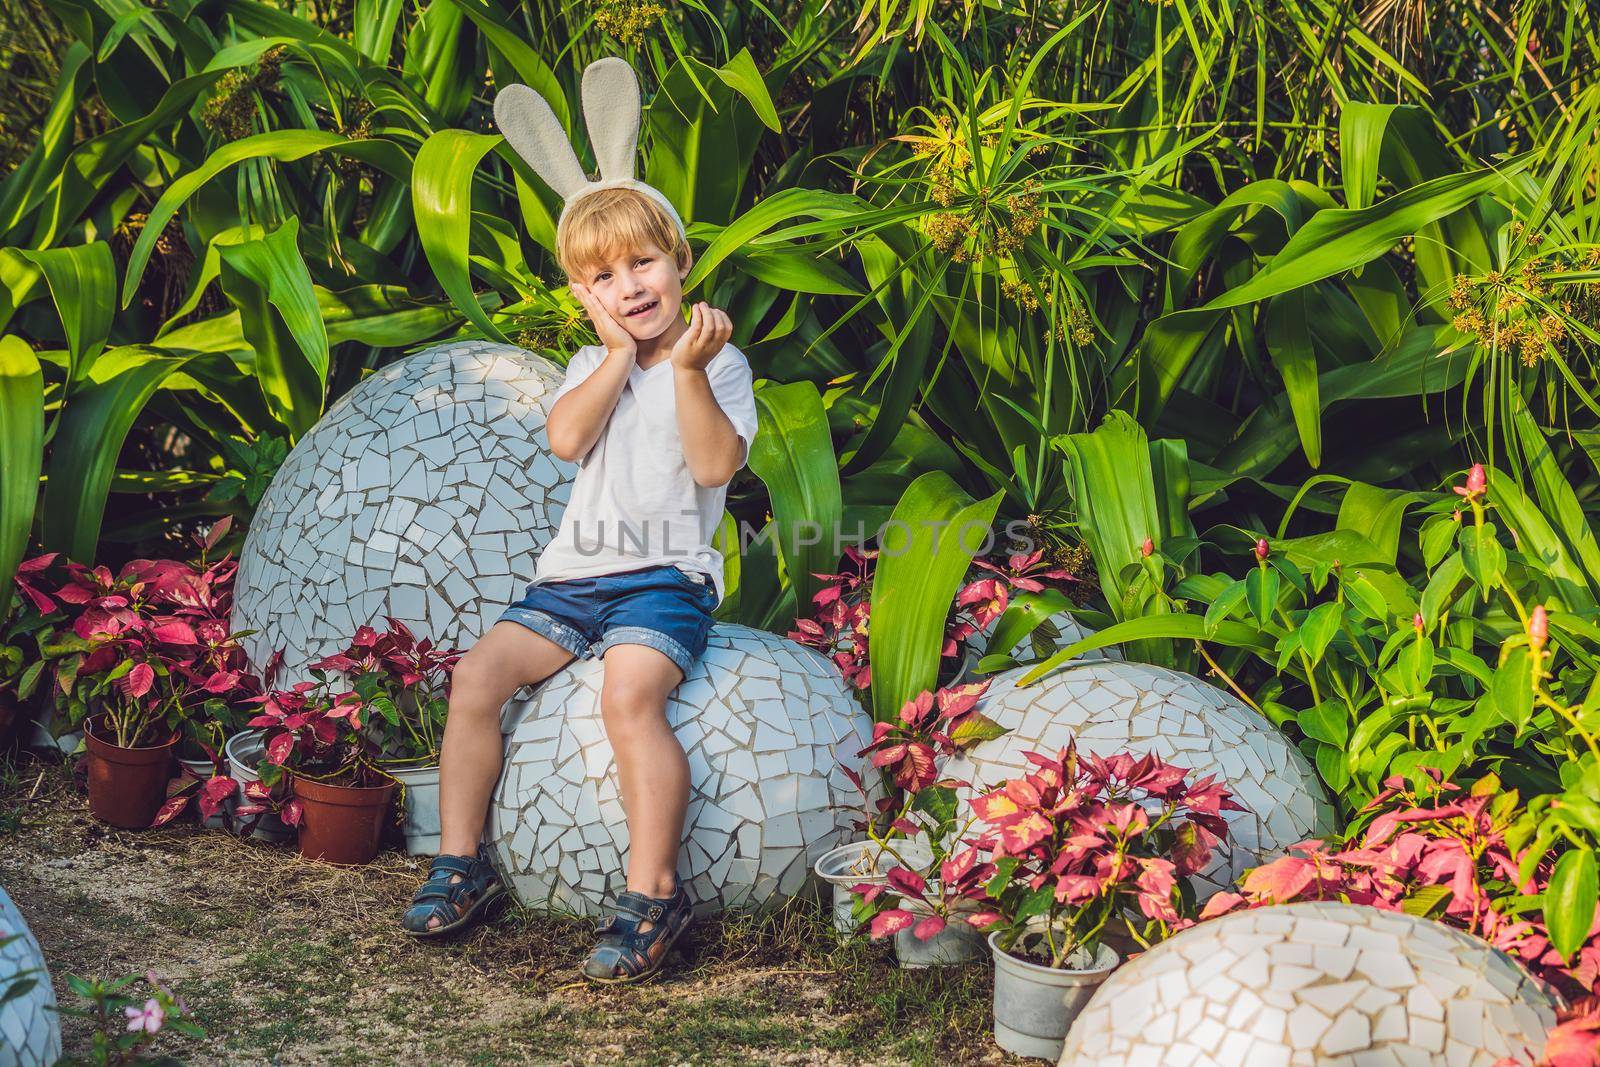 Cute little kid boy with bunny ears having fun with traditional Easter eggs hunt, outdoors. Celebrating Easter holiday. Toddler finding, colorful eggs.